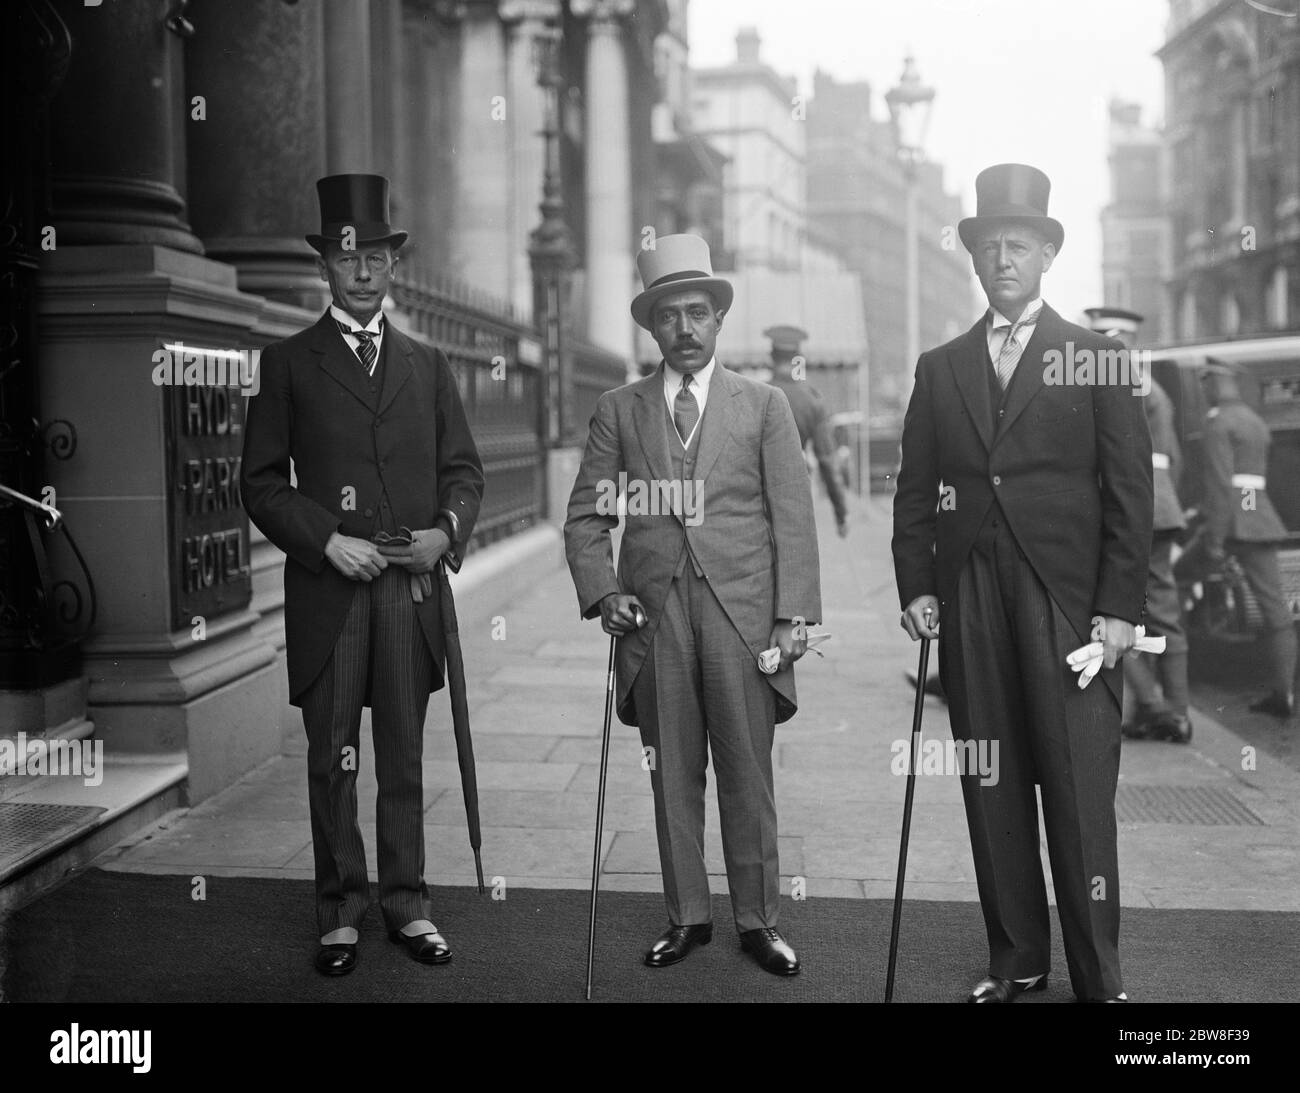 Sultan of Muscat and Oman arrives . The Sultan ( centre ) on arrival at his hotel in London . 15 September 1928 Stock Photo